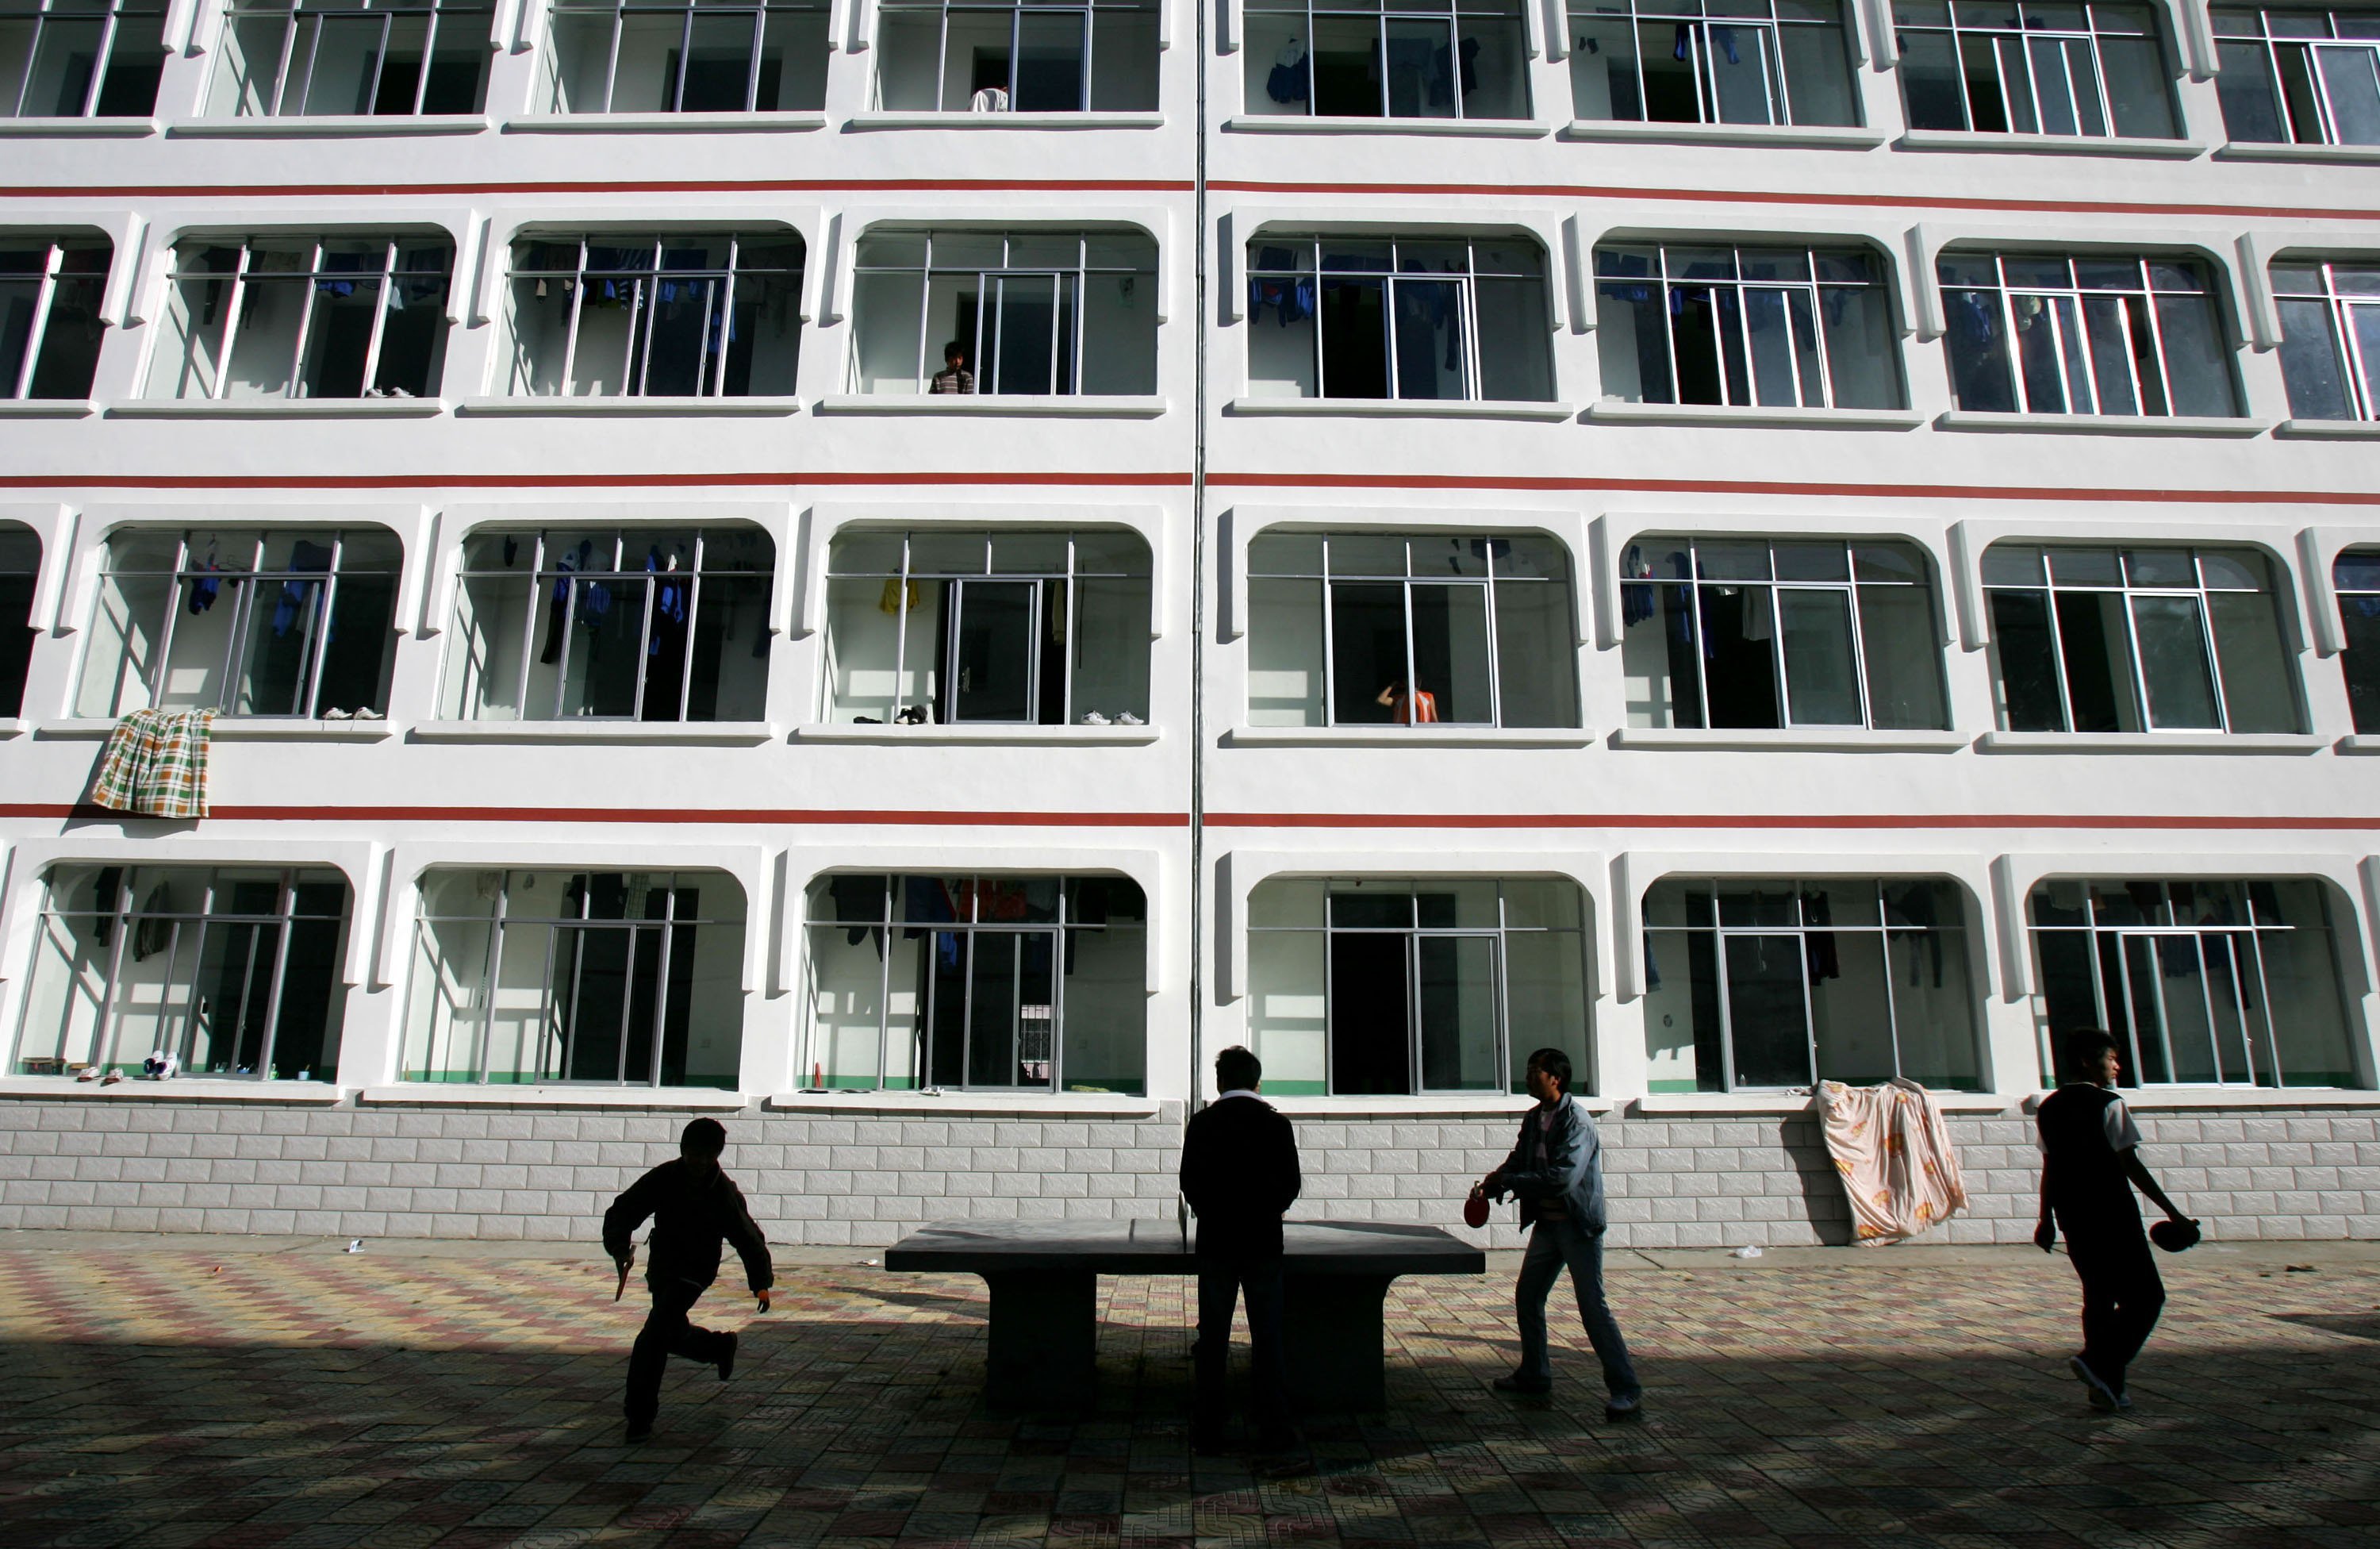 Tibetan students play table tennis in front of a dormitory at Nyingchi First High School, the only high school of Nyingchi Prefecture, on October 29, 2006 in Nyingchi County of Tibet Autonomous Region, China.